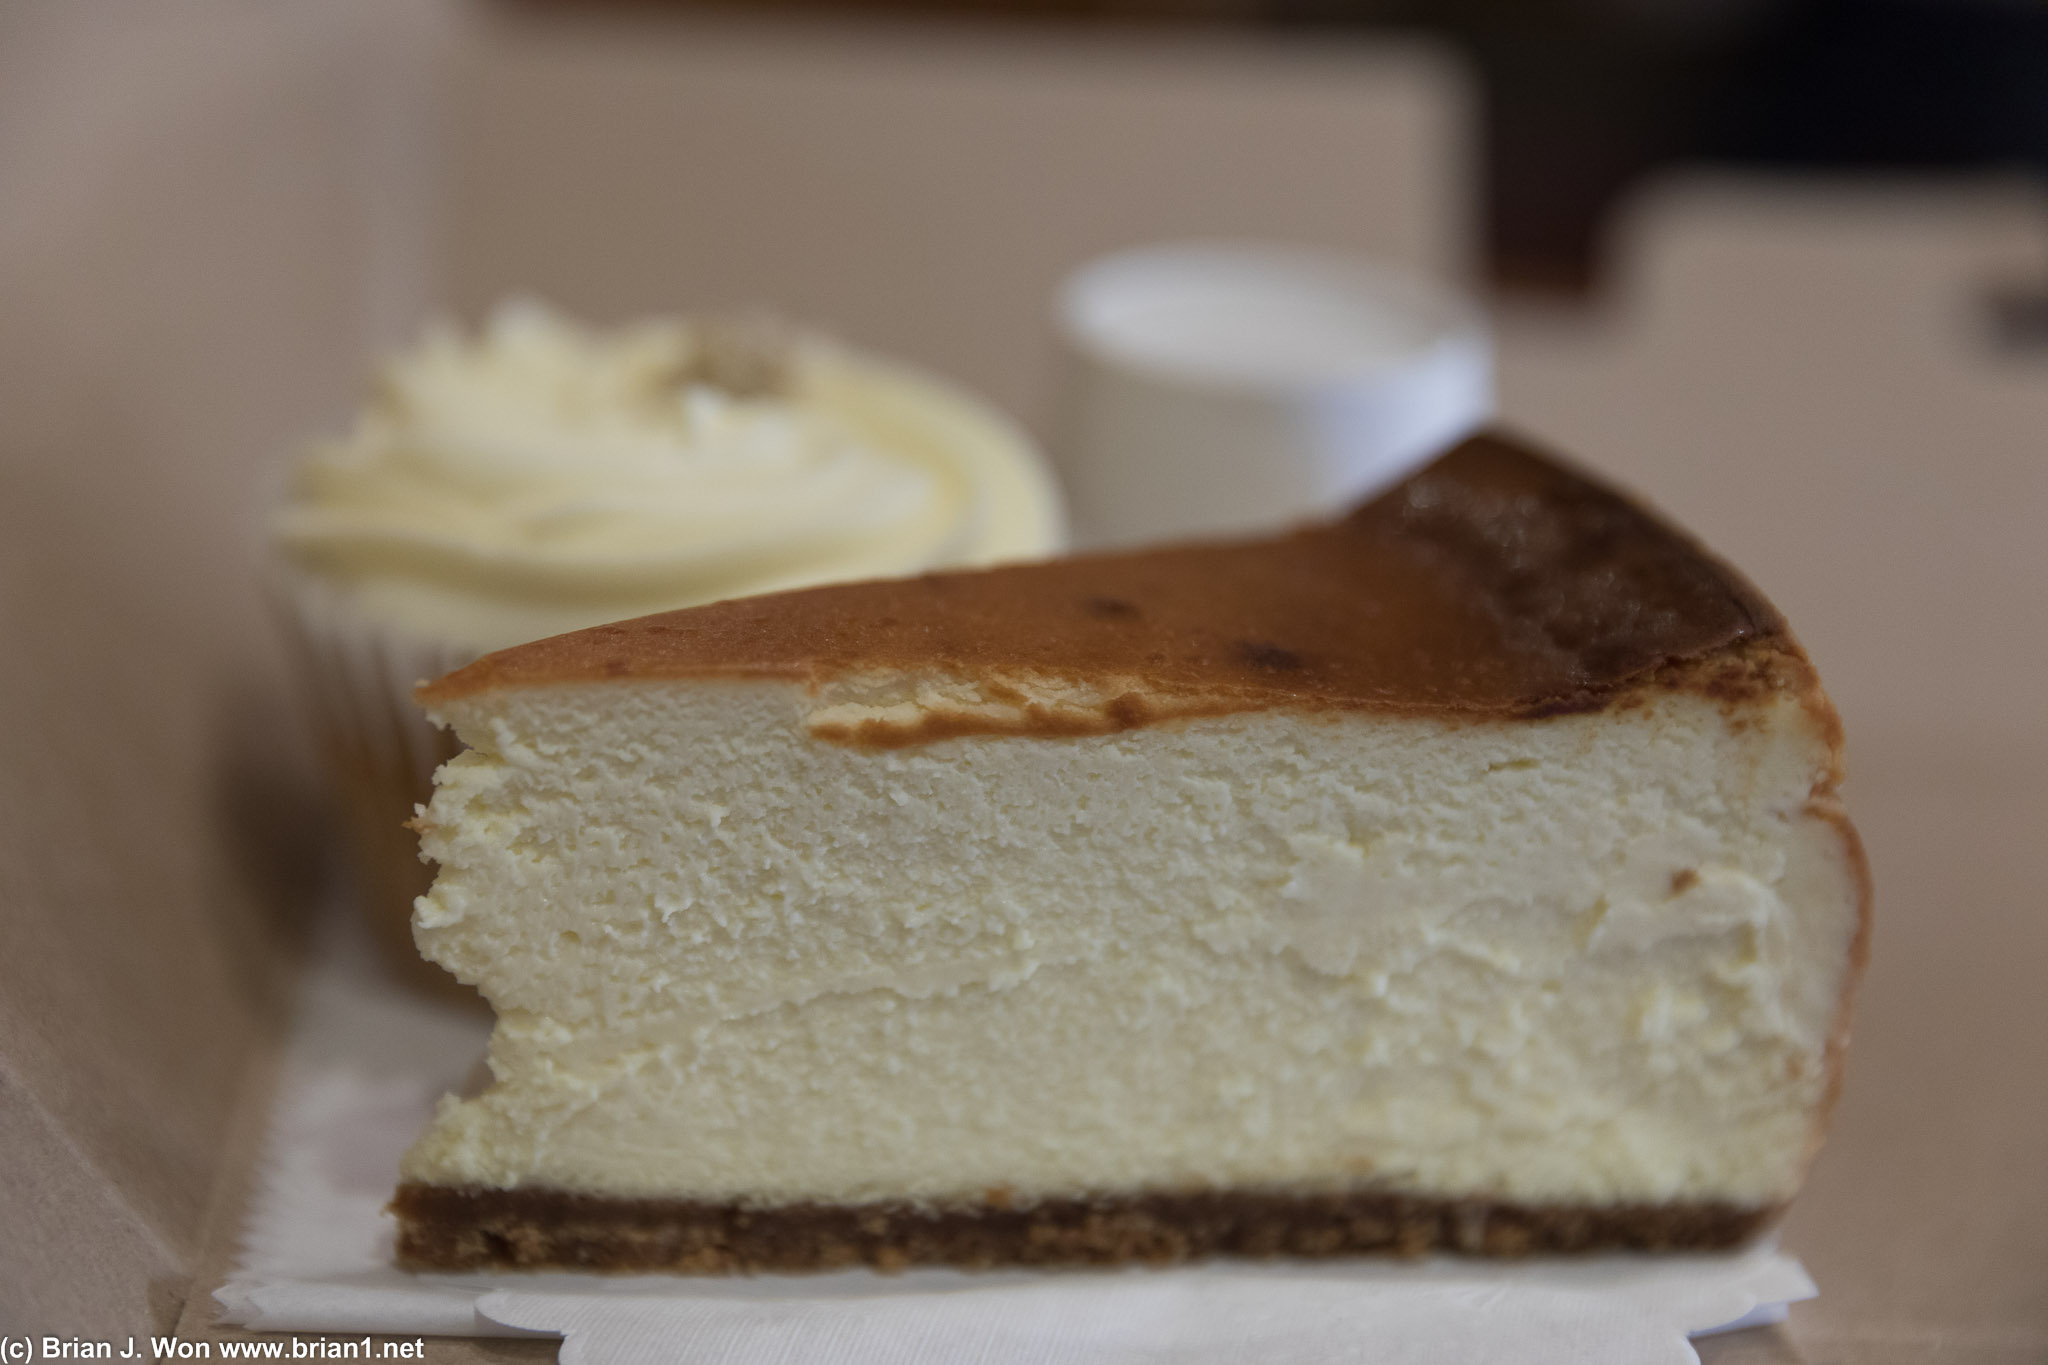 Cheesecake is delicious.